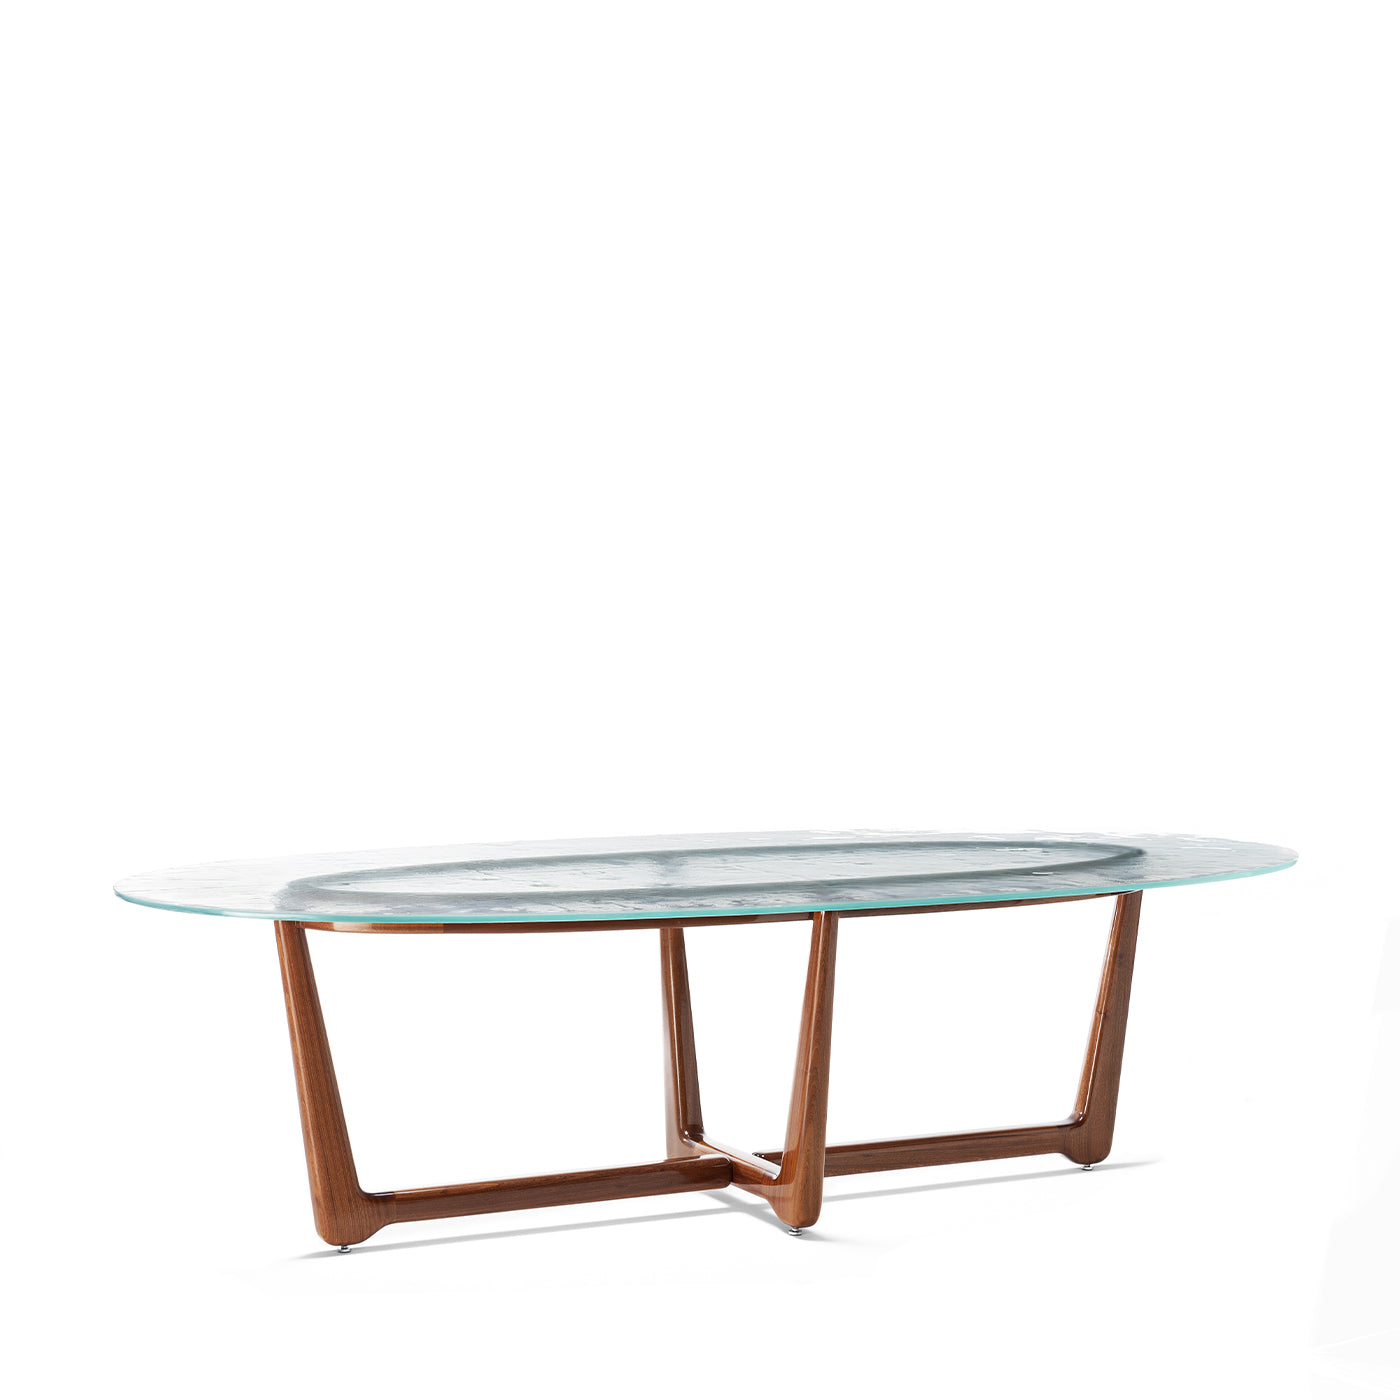 Sunset Dining Table by Paola Navone - Alternative view 1